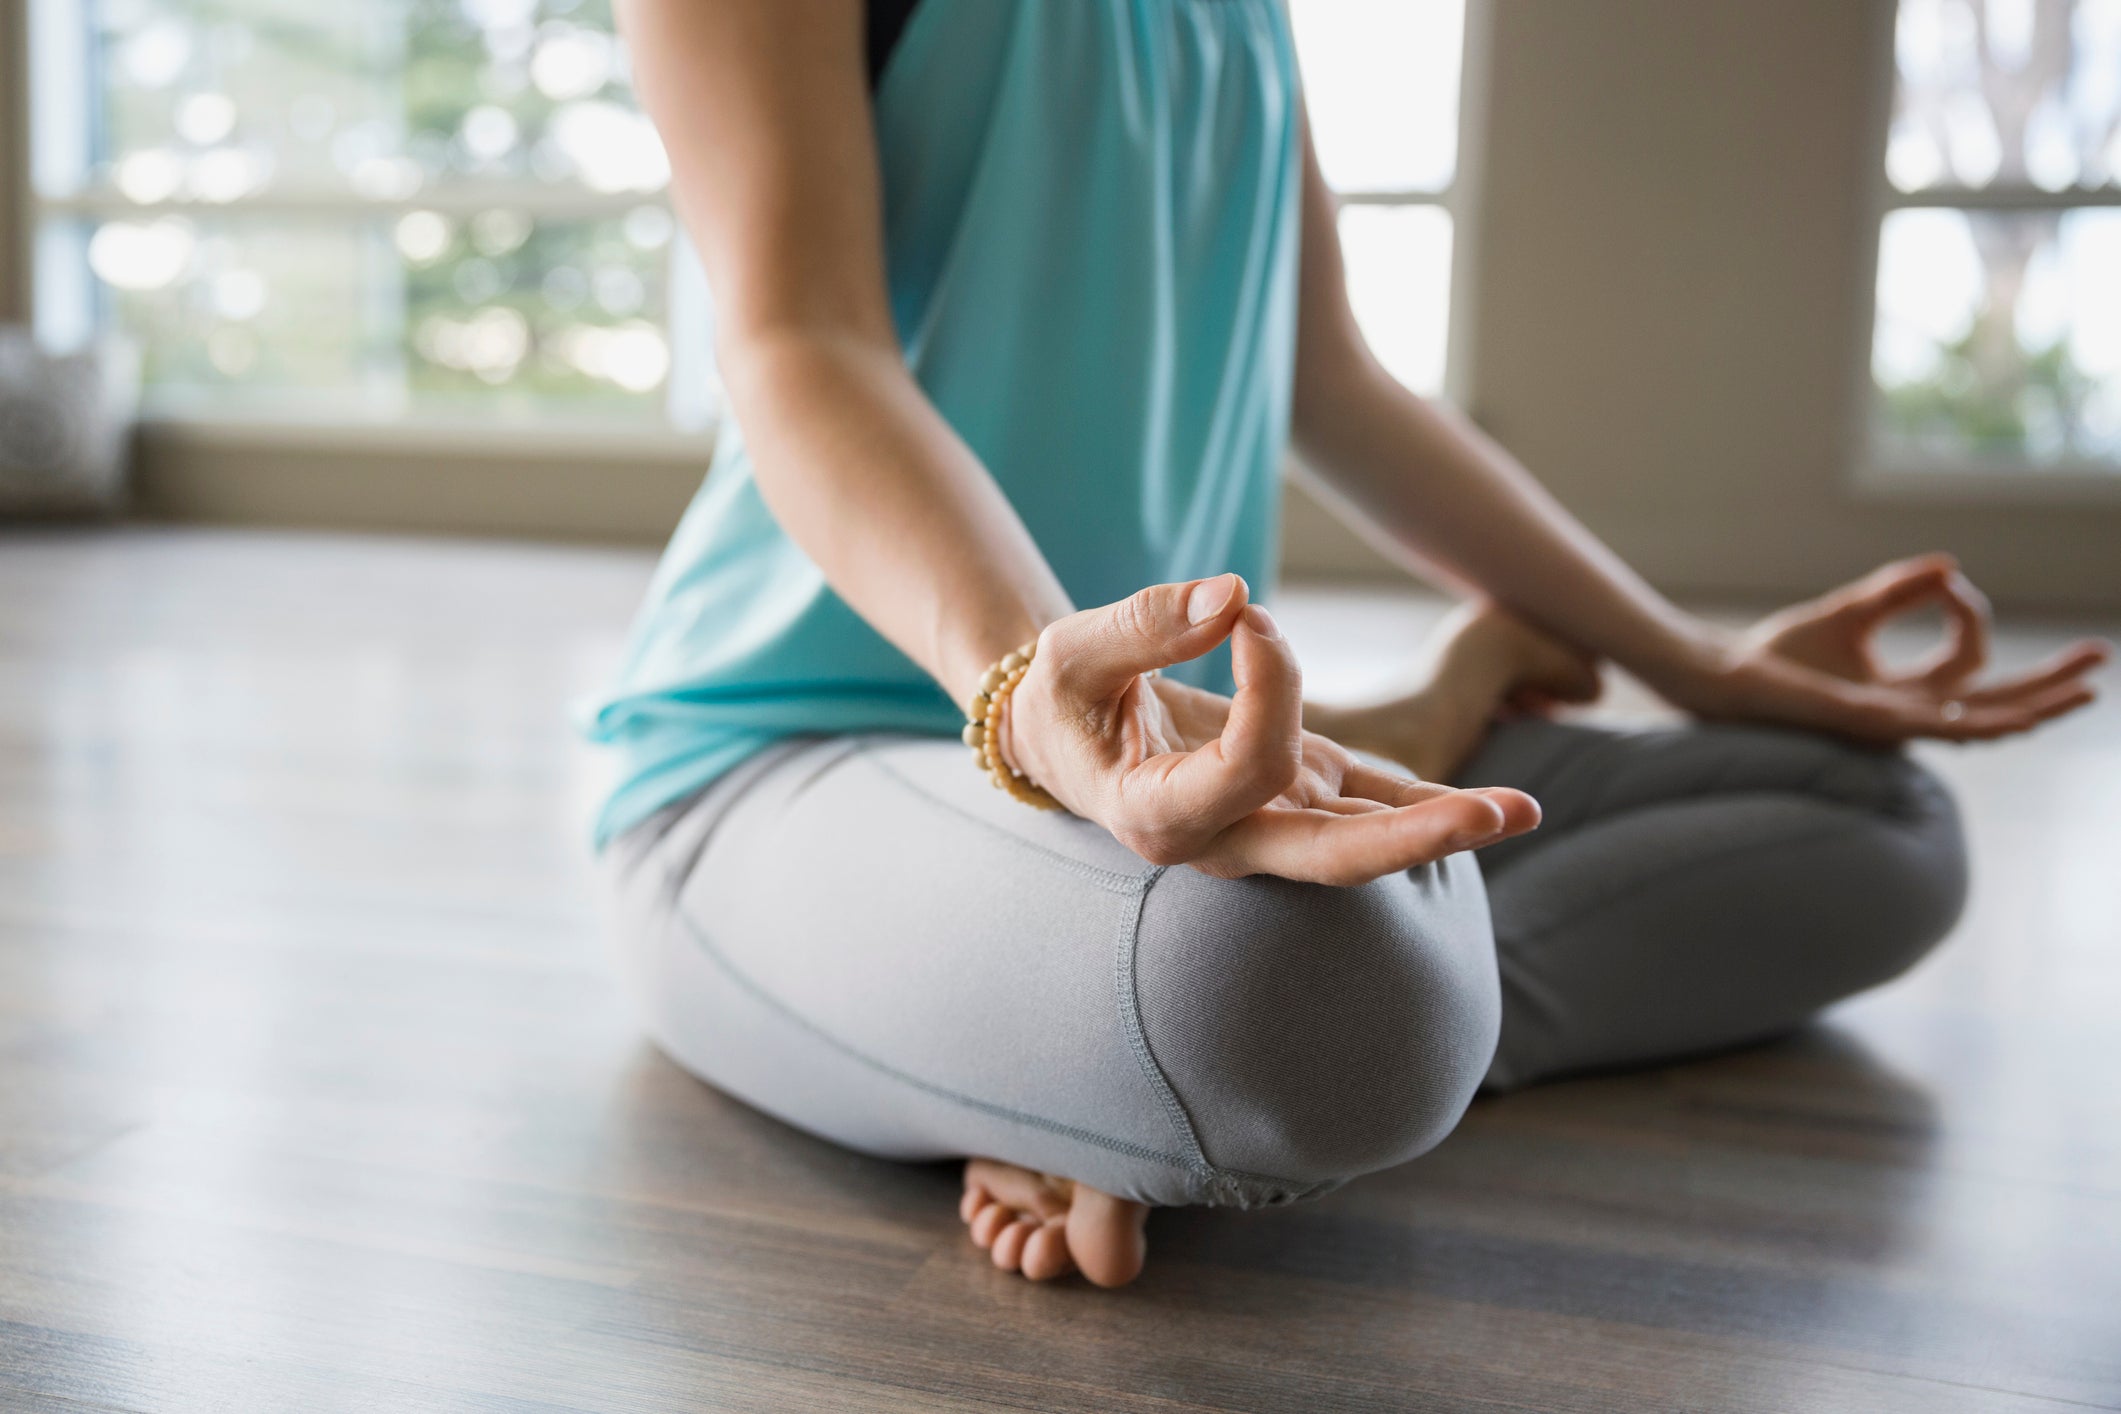 The Benefits of Applying Mindfulness to Exercise - Scientific American